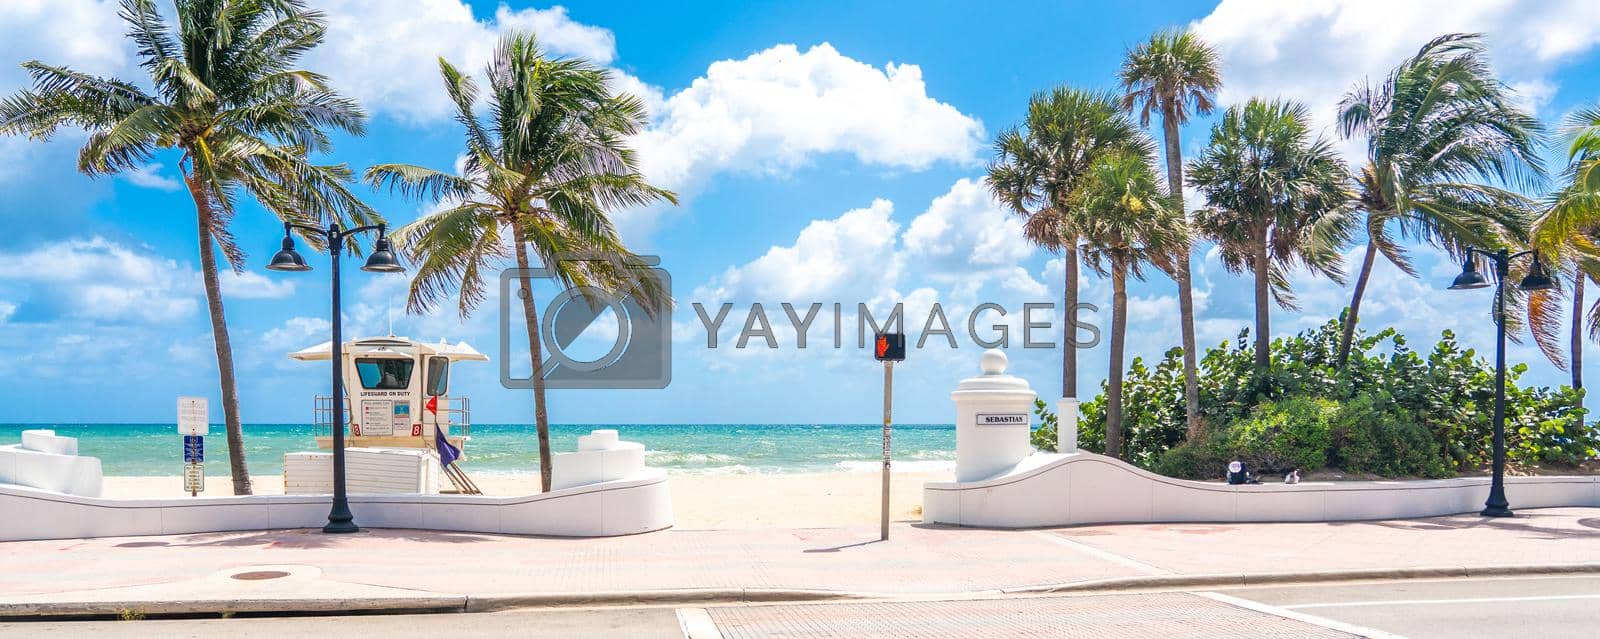 Royalty free image of Seafront with lifeguard hut in Fort Lauderdale Florida, USA by Mariakray